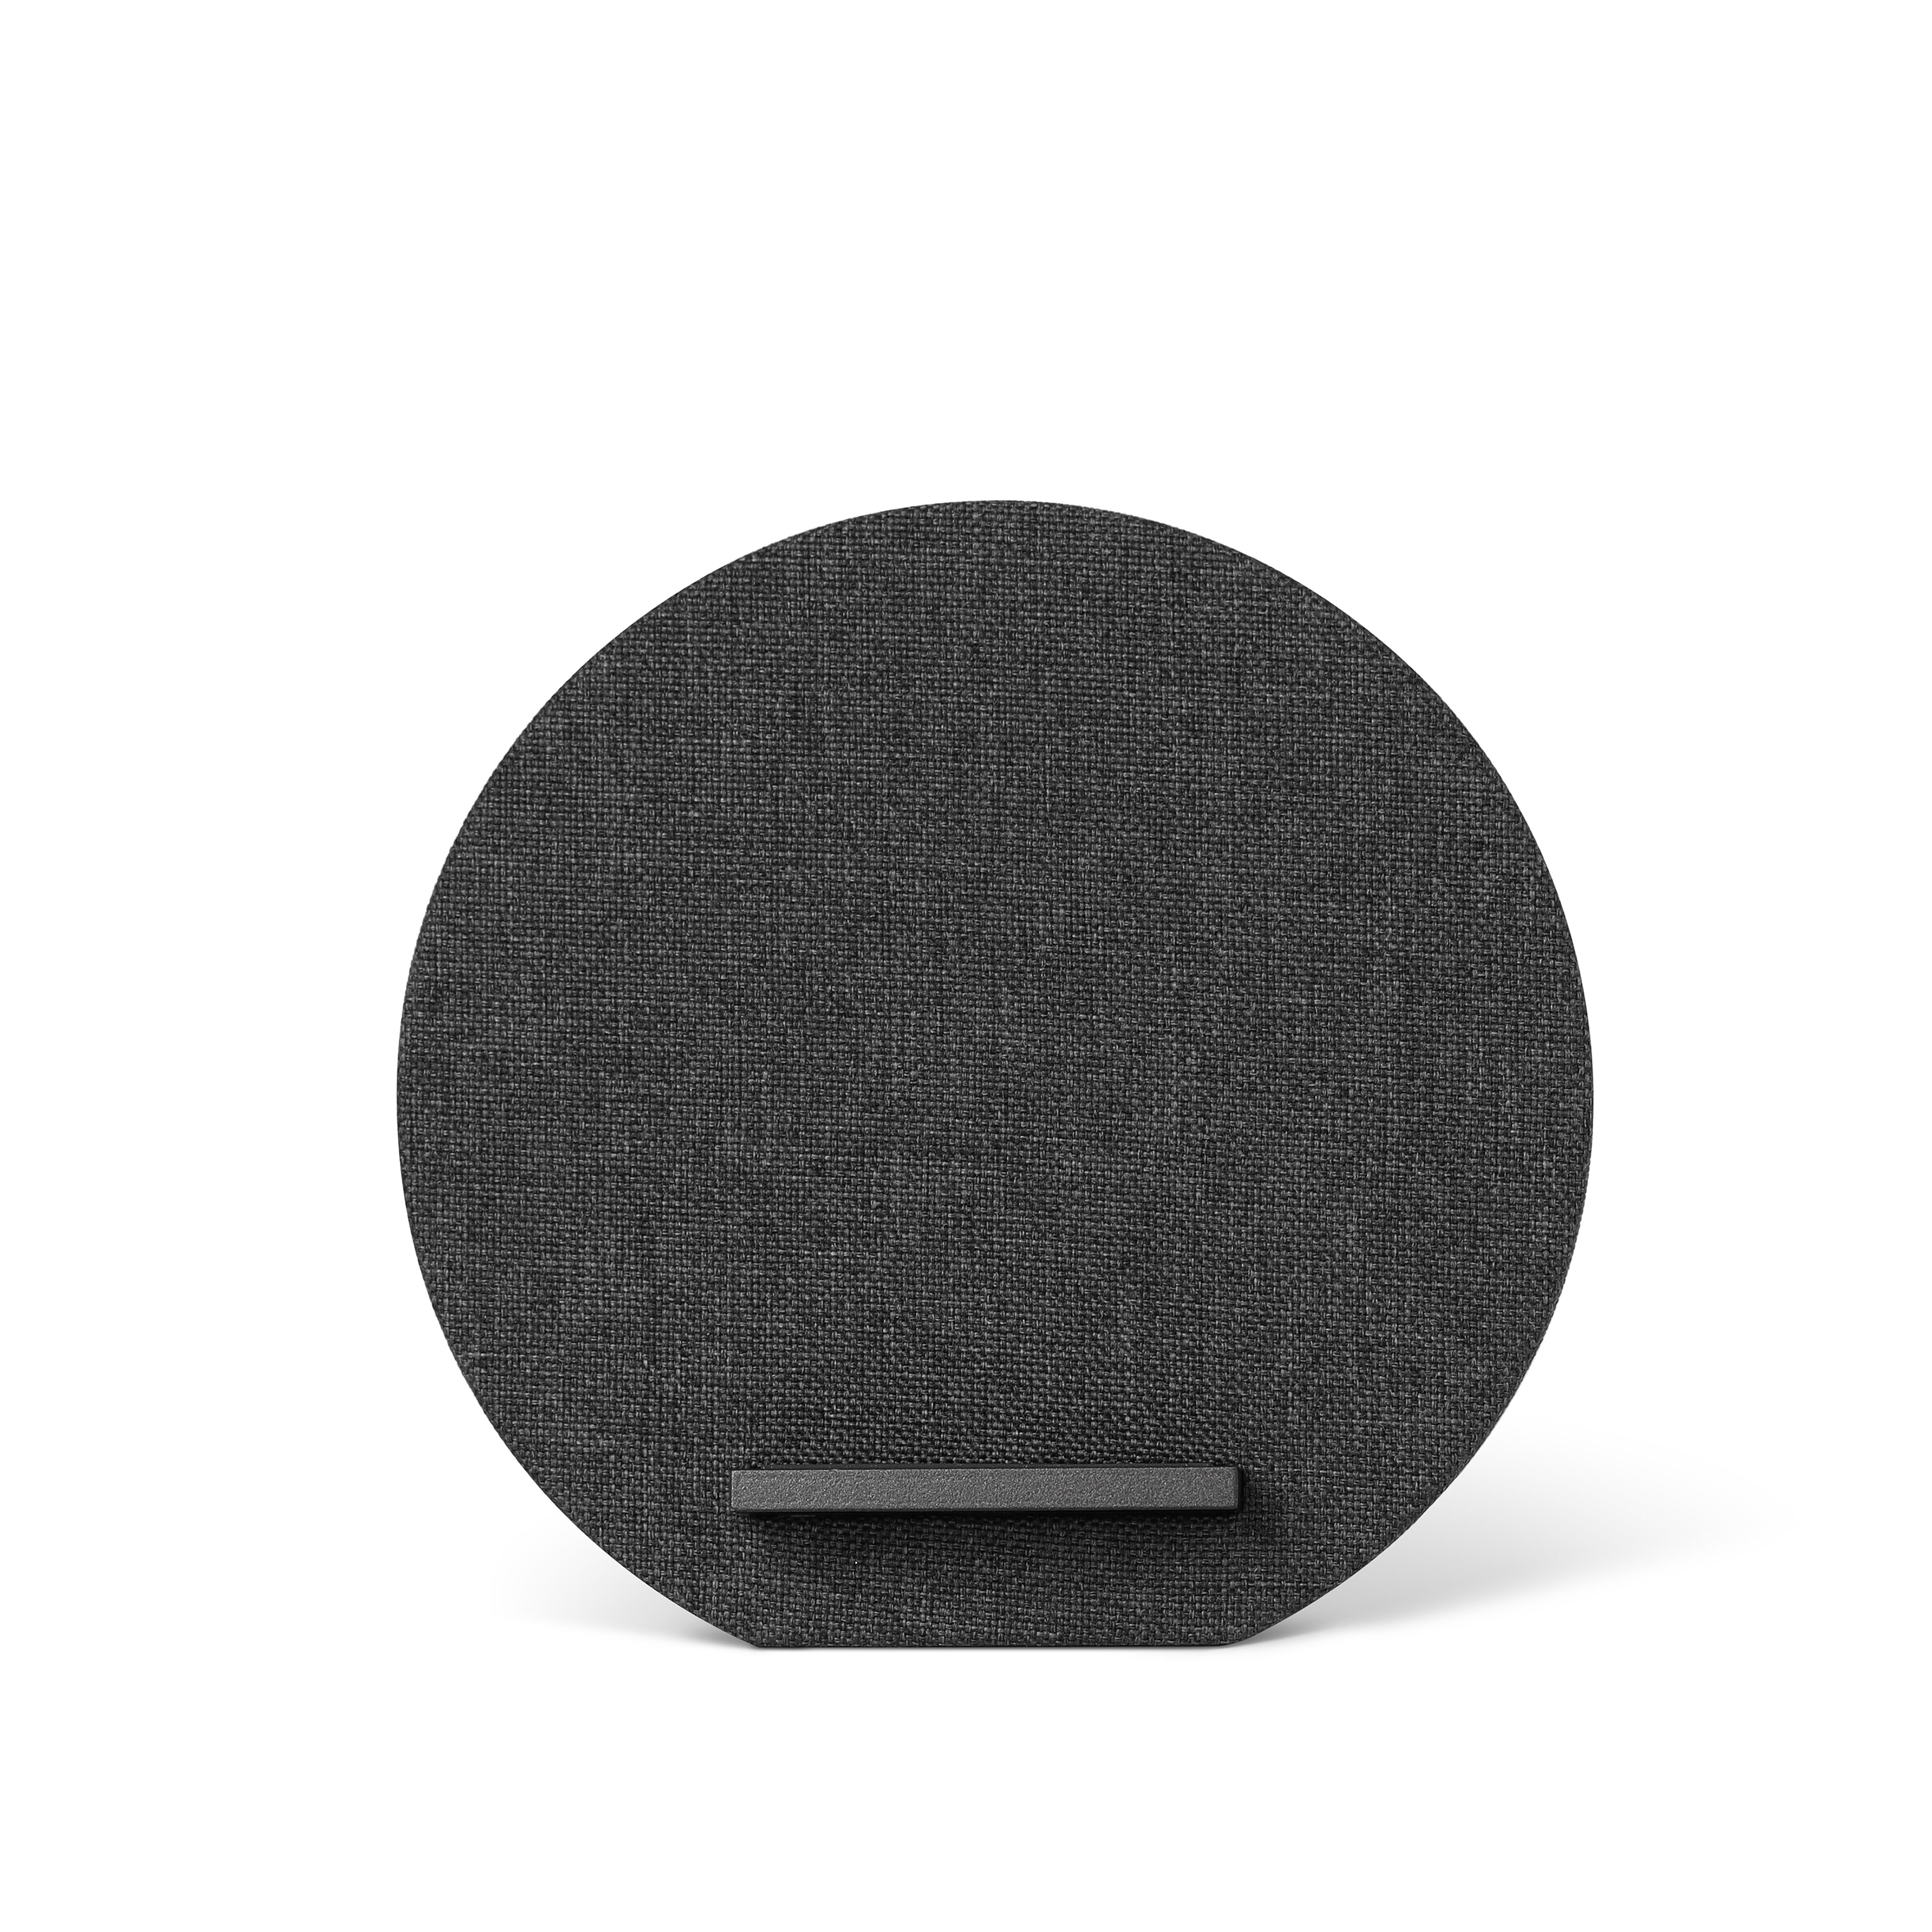 Native Union Native Union Dock Wireless Charger Accessories | Heathrow  Boutique